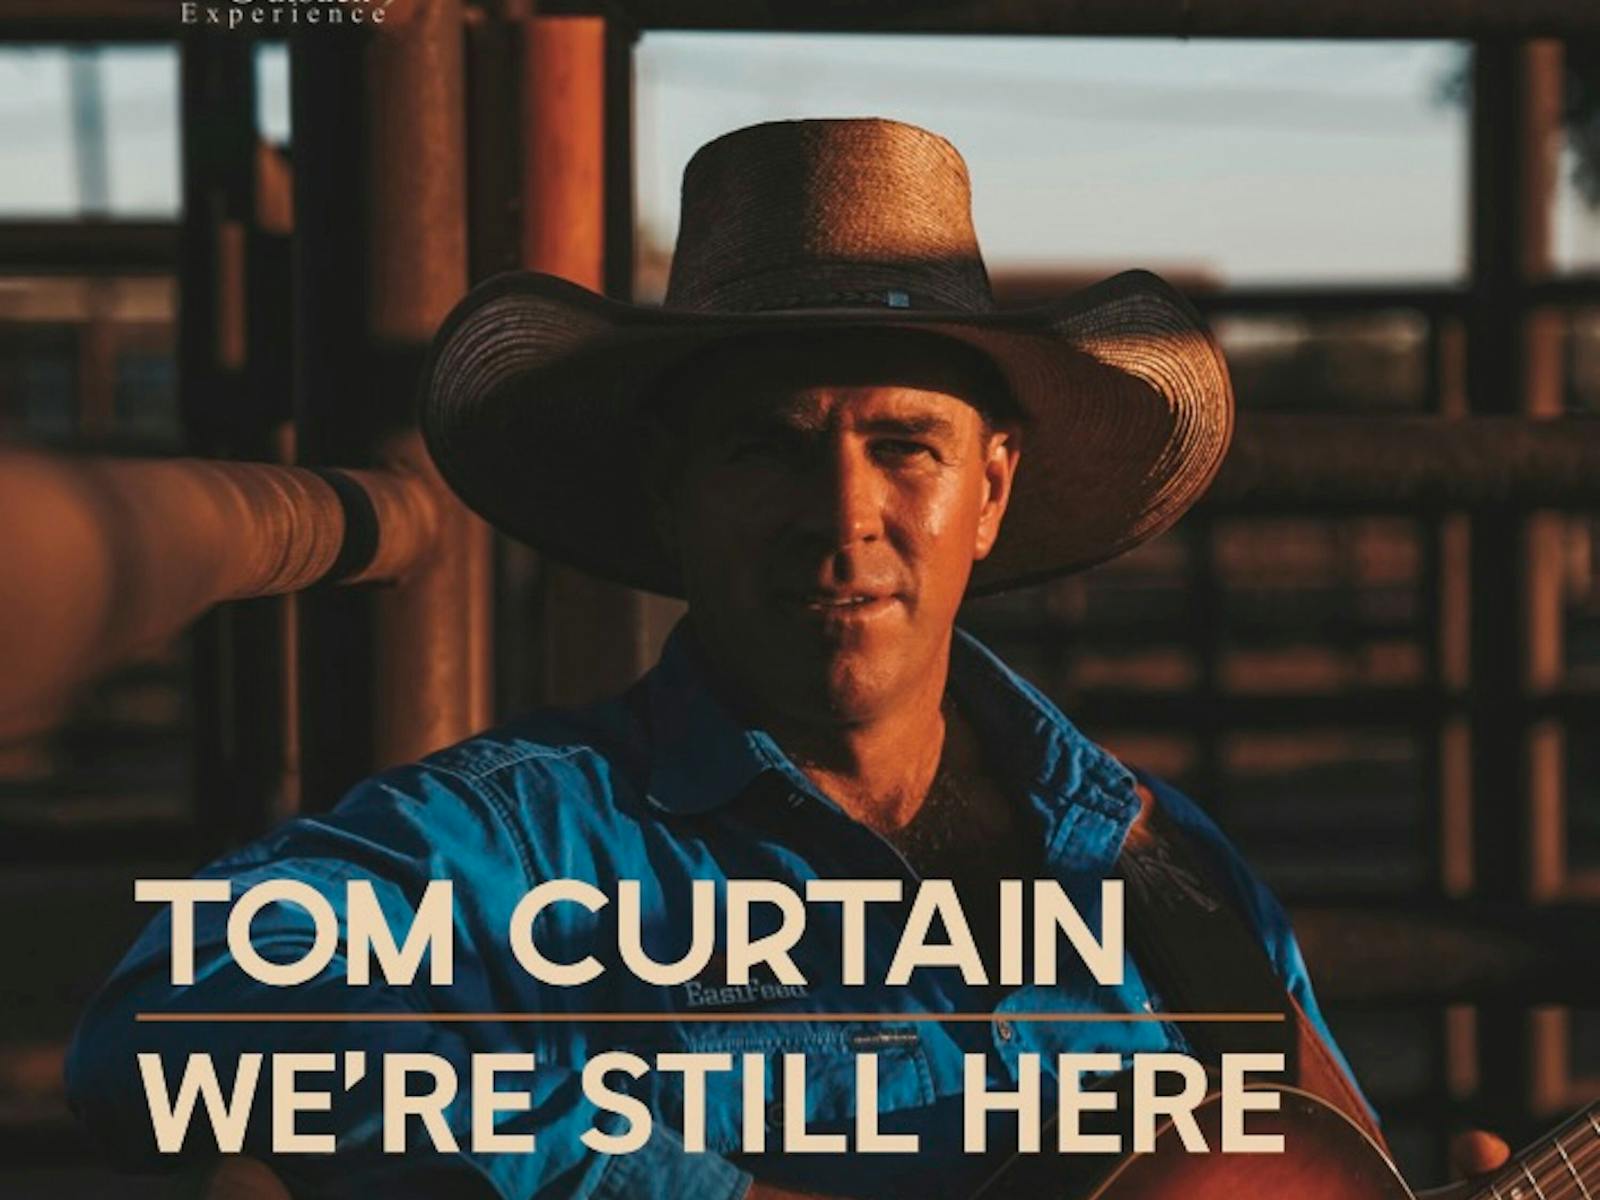 Image for Tom Curtain’s 'We’re Still Here' Tour – Molong